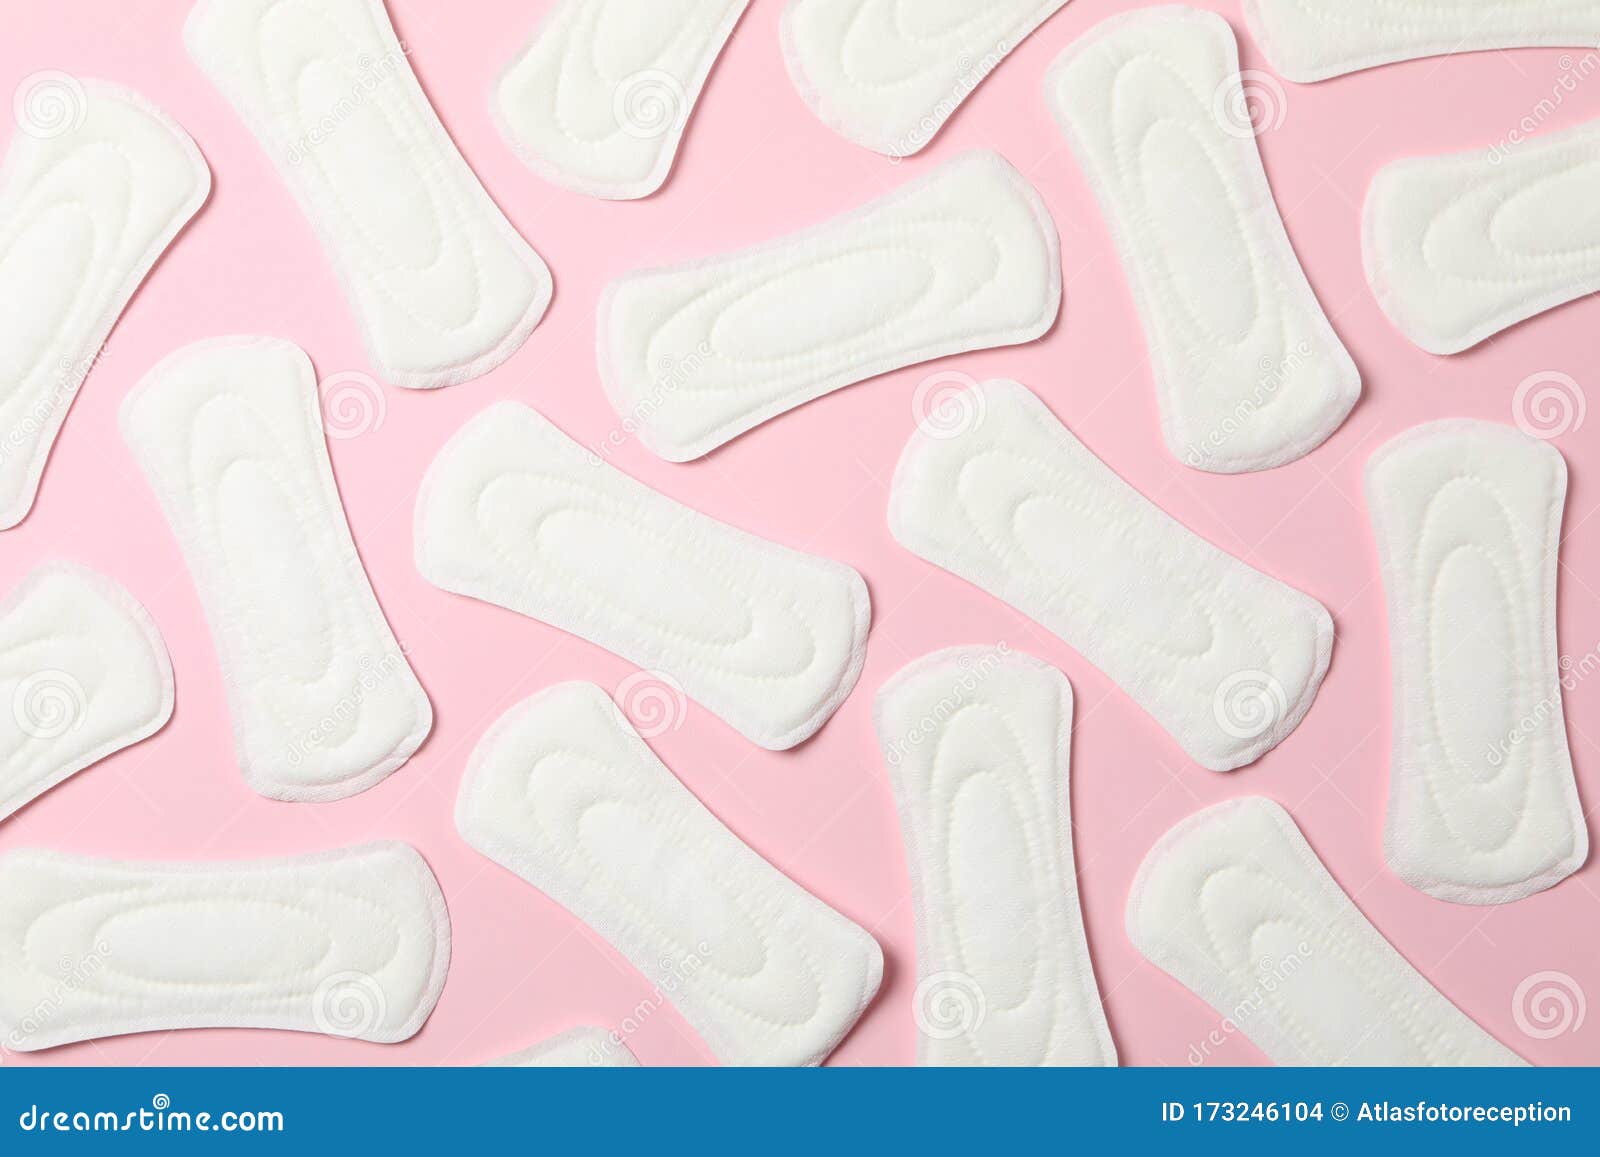 flat lay with sanitary pads on pink background